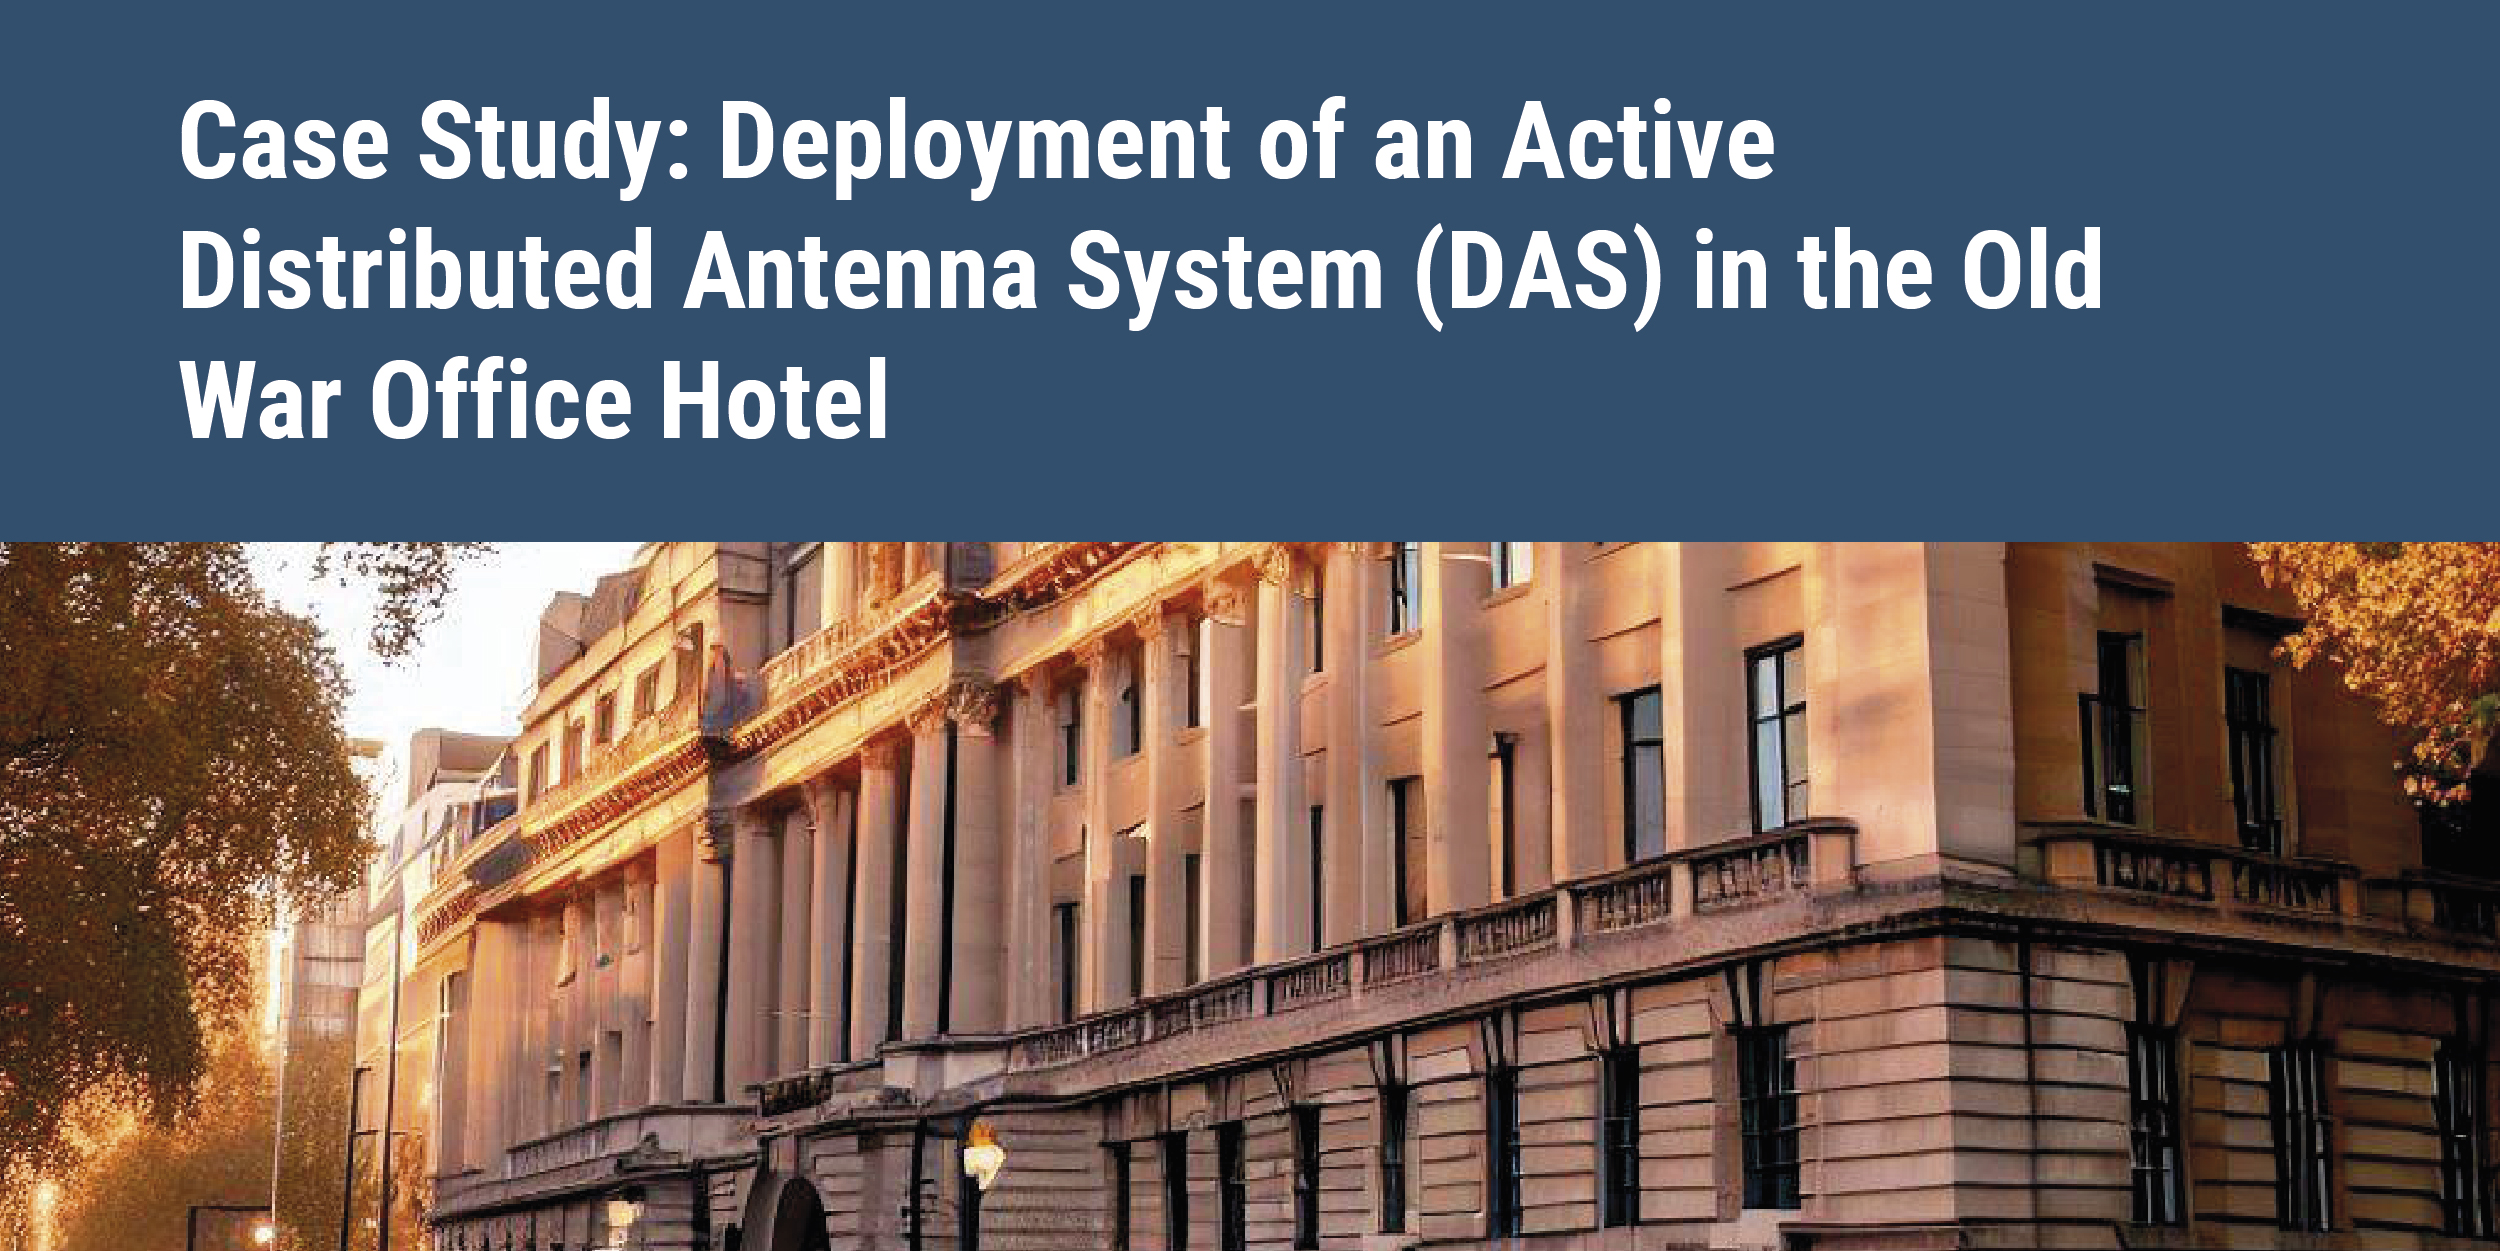 Active DAS (Distributed Antenna System) deployment in the Old War Office Hotel to increase mobile signal coverage